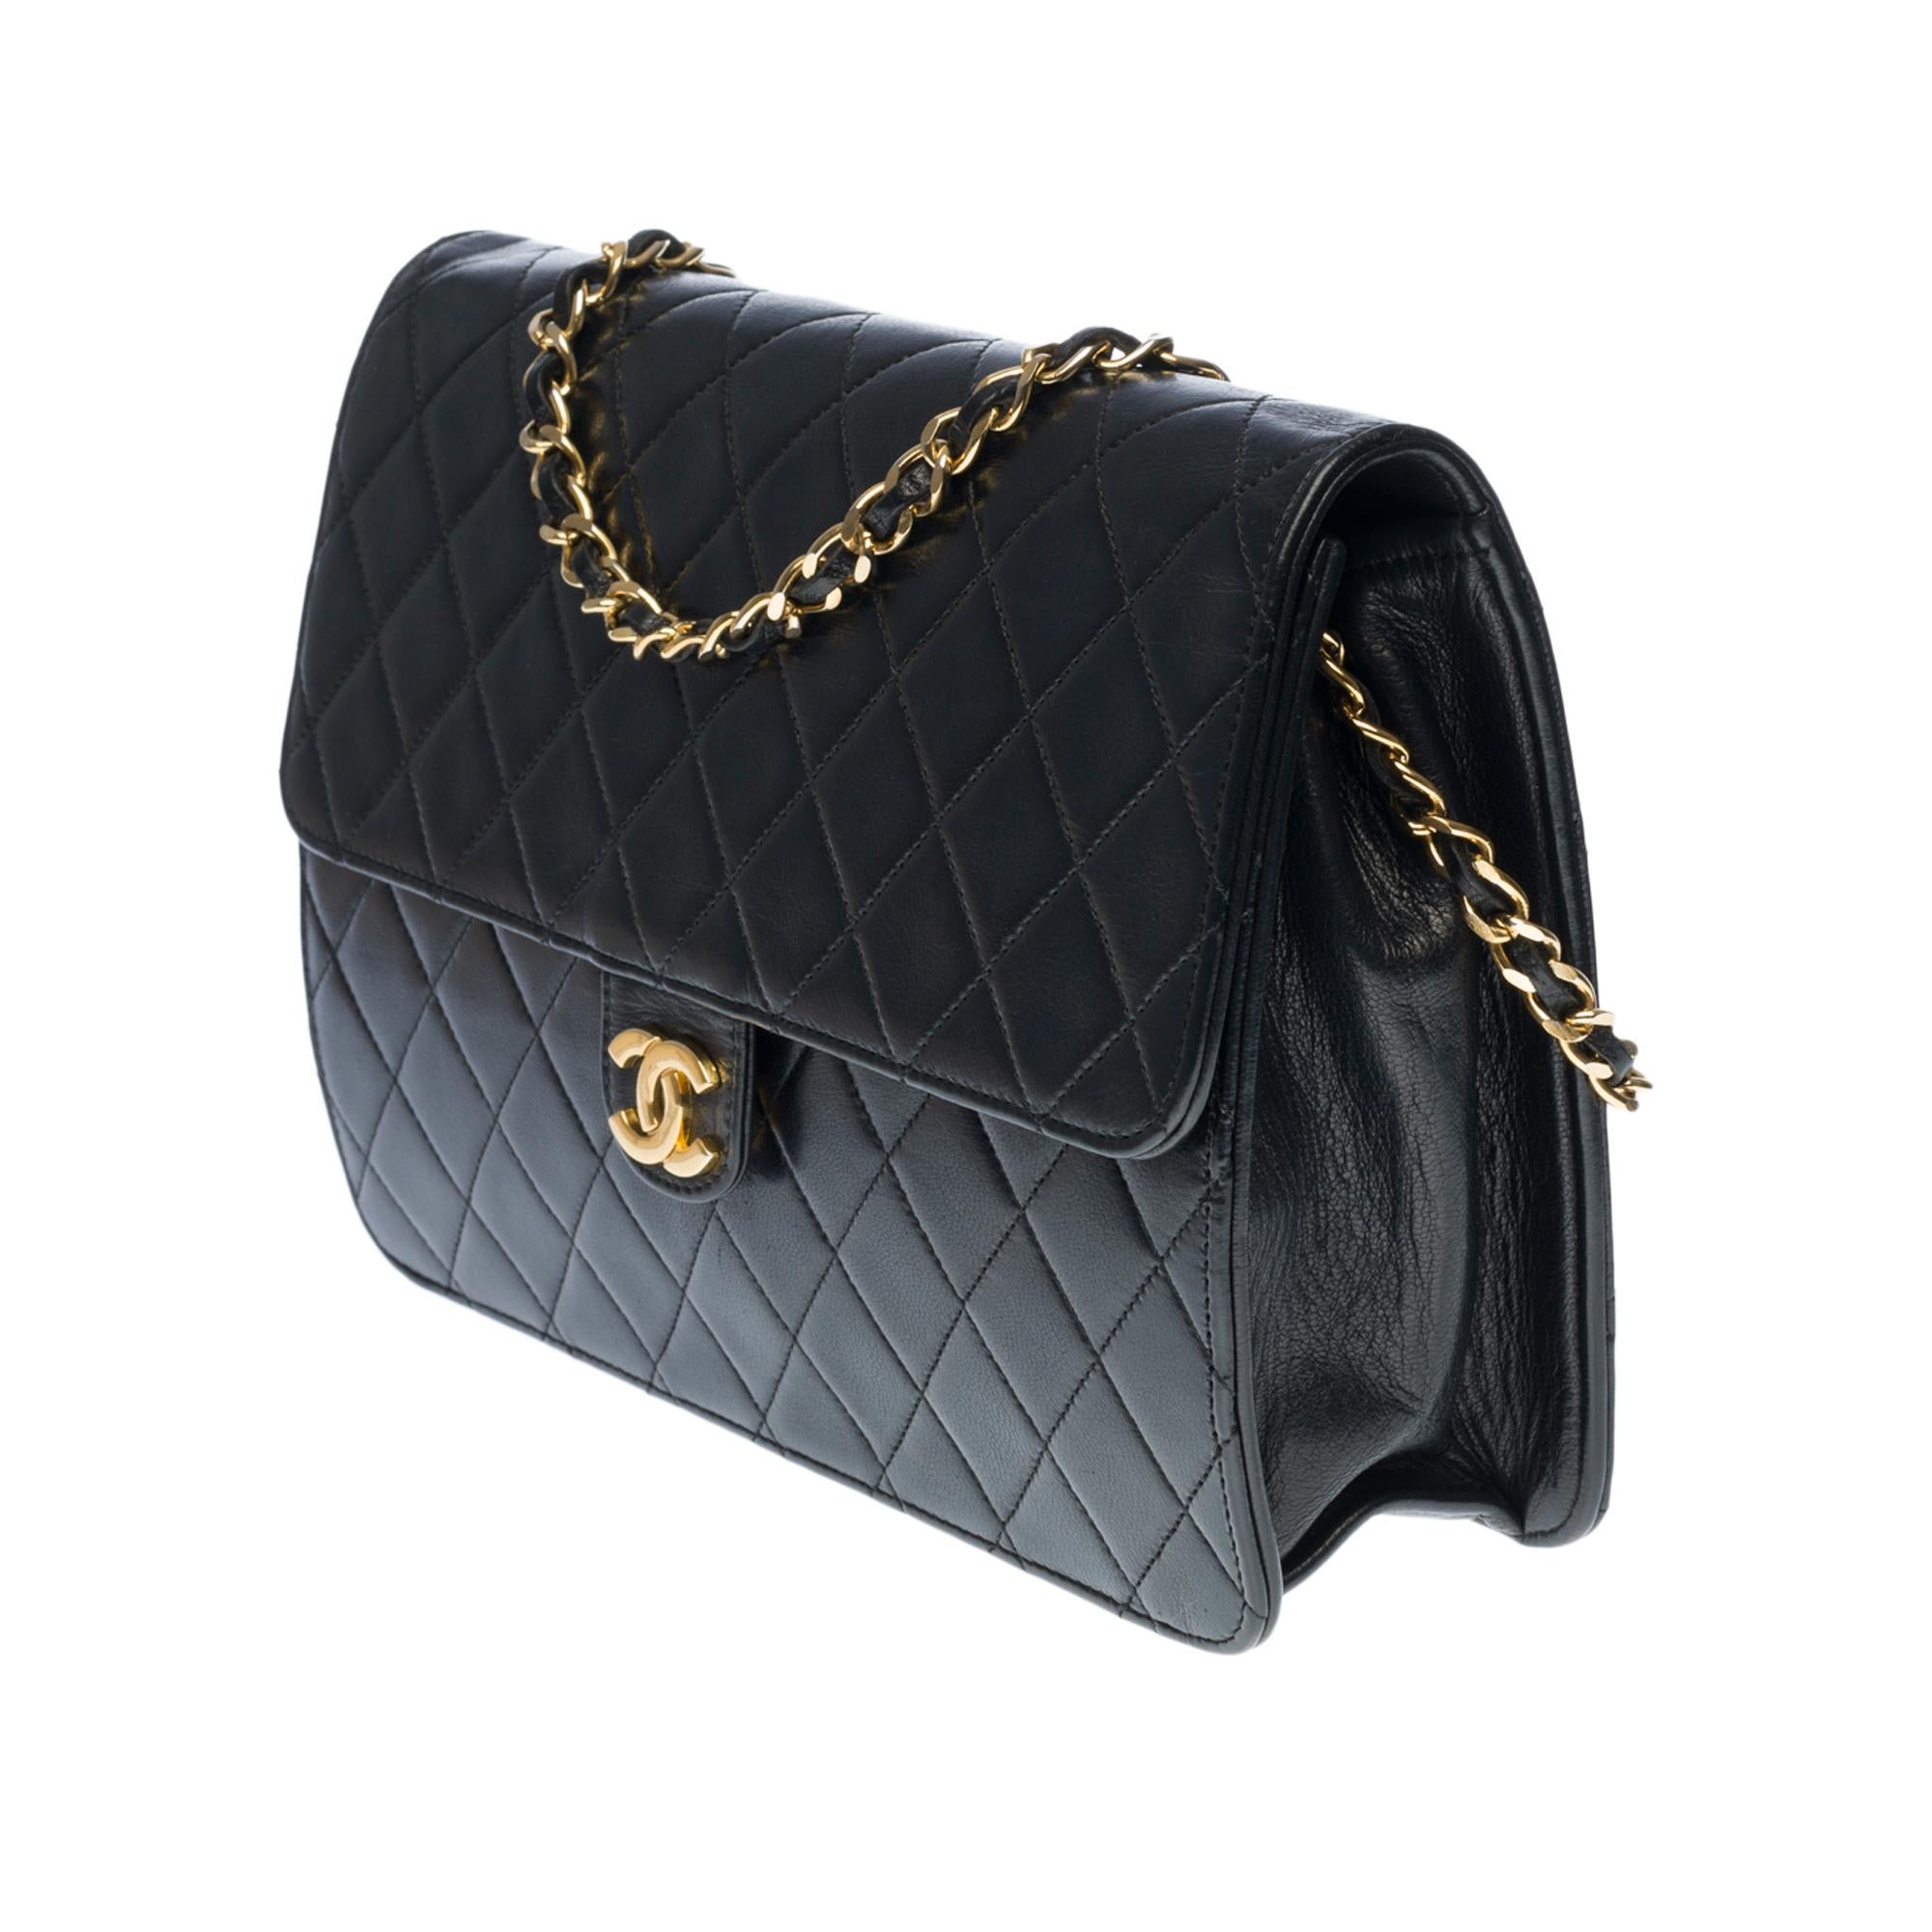 Black Chanel Classic Flap shoulder bag in black quilted lambskin and gold hardware